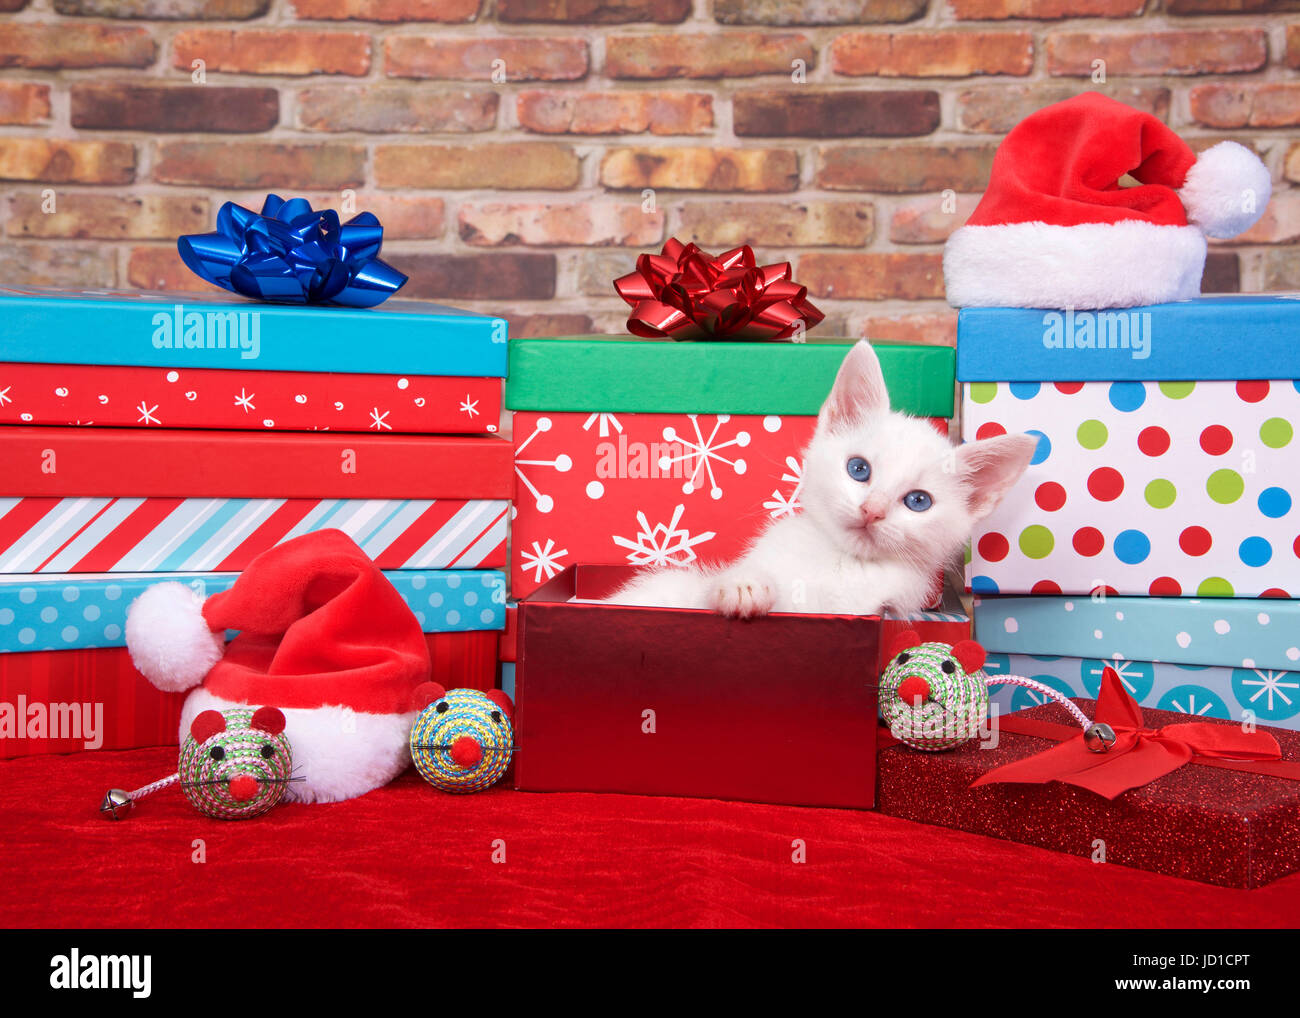 Adorable fluffy white kitten laying in a red box with christmas presents piled all around, santa hats and toy mice on red fuzzy carpet with brick wall Stock Photo